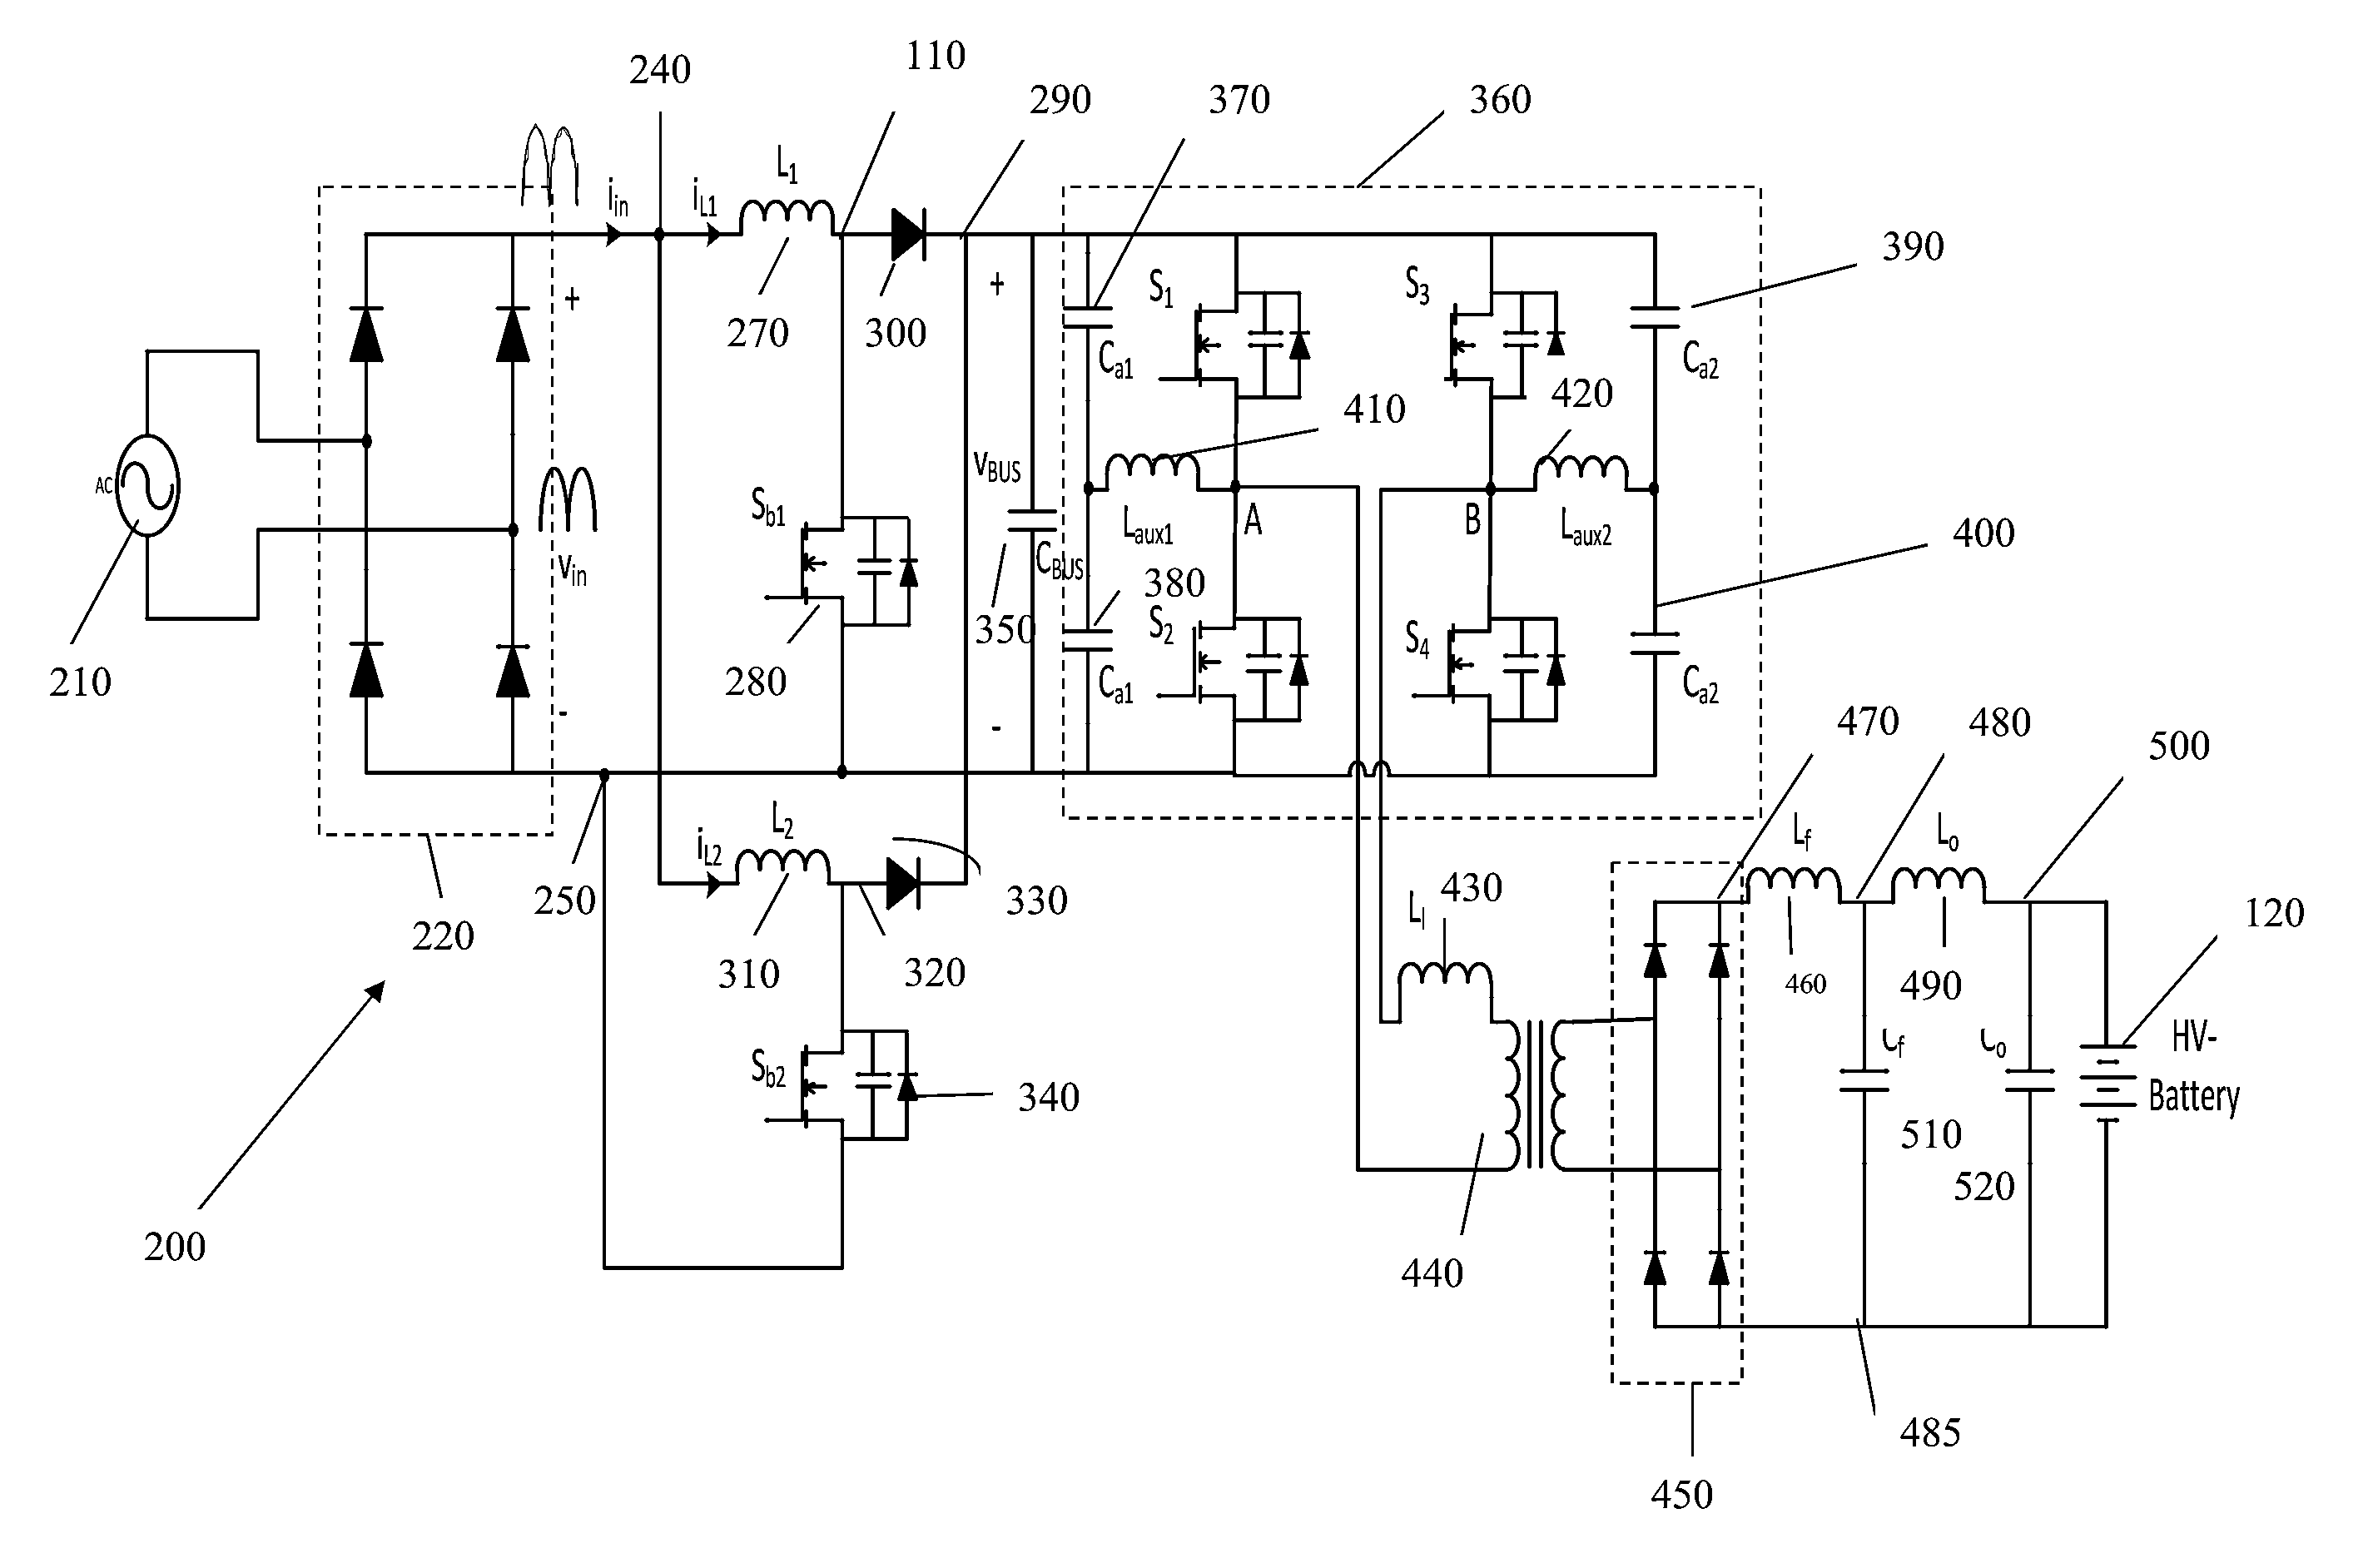 Input power controller for AC/DC battery charging